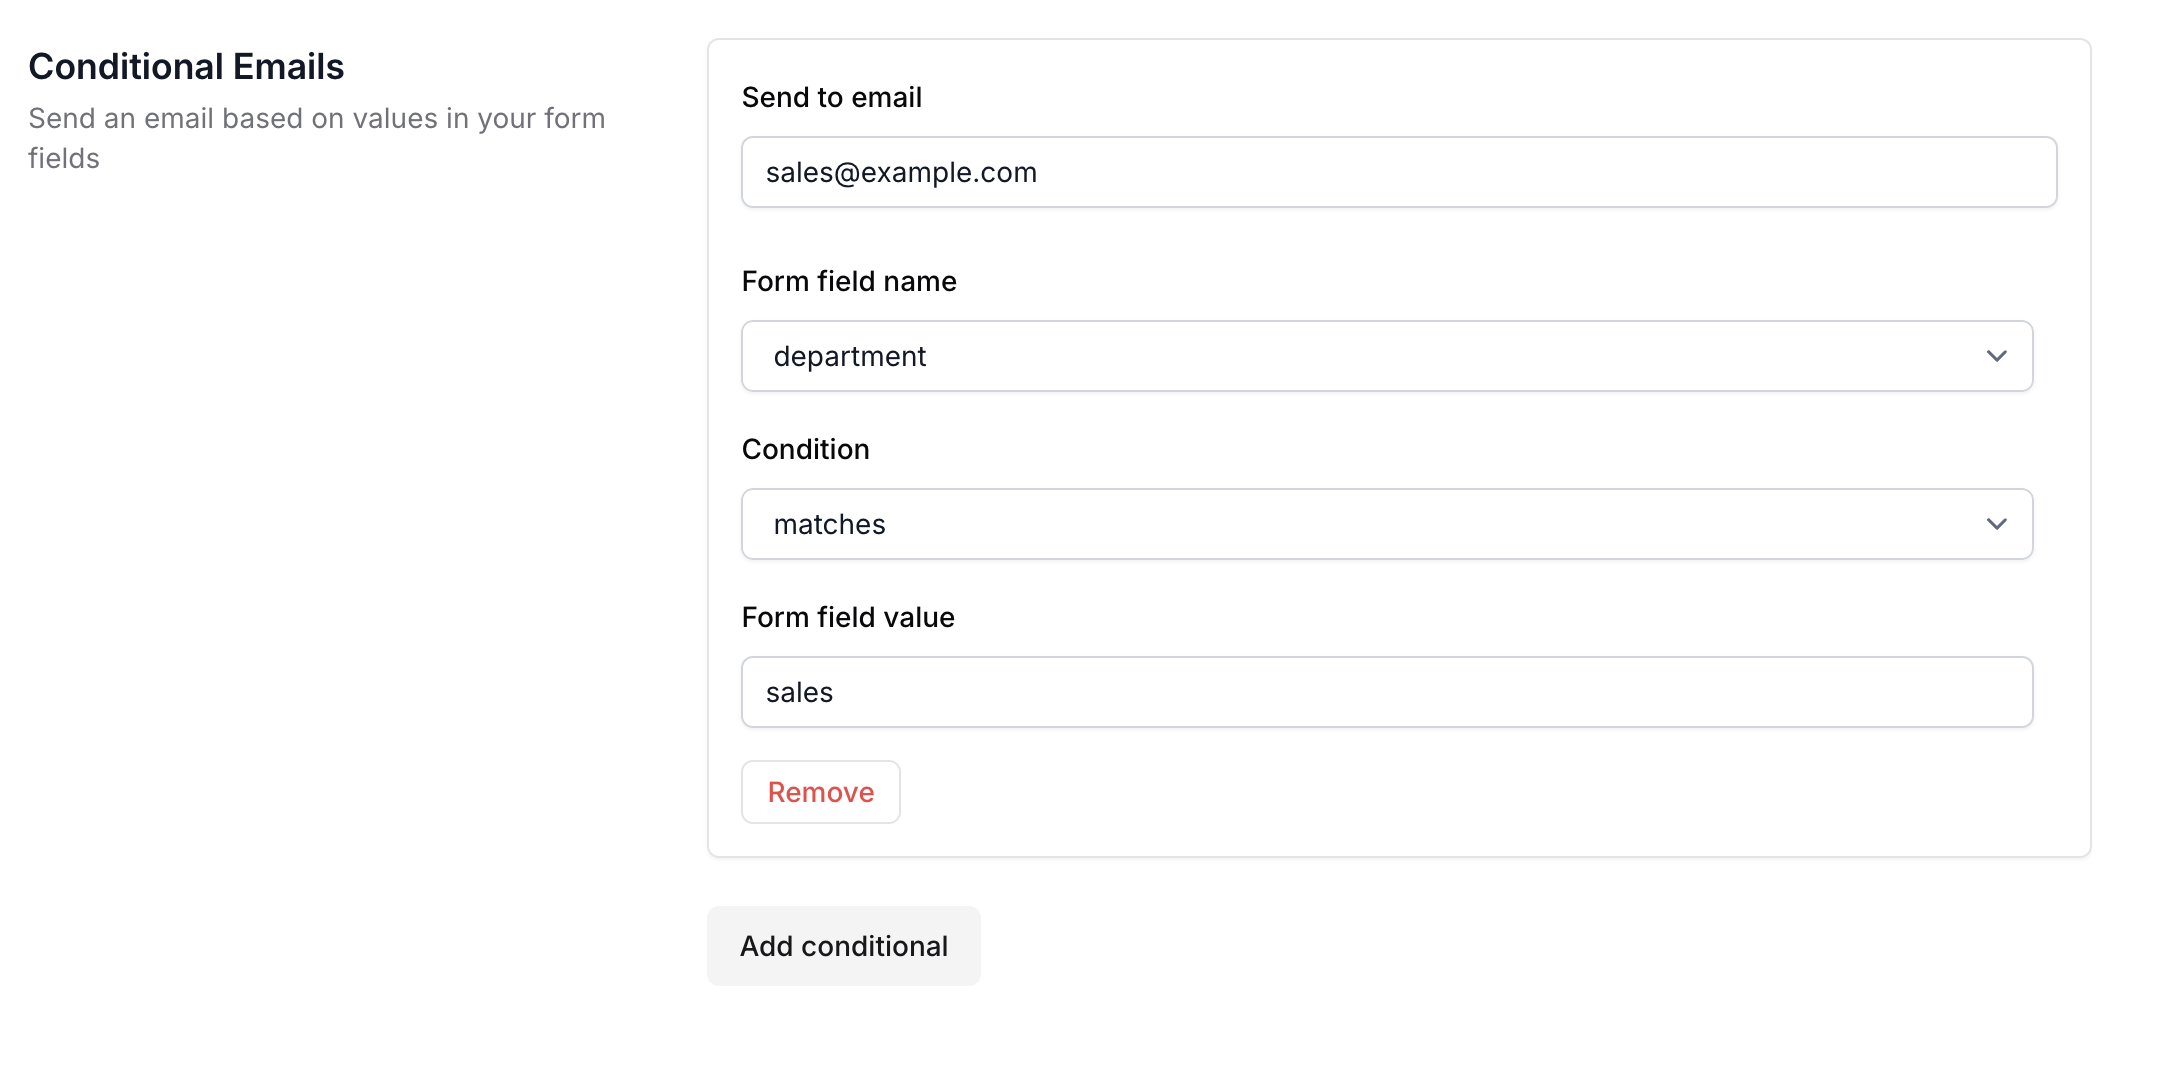 Sending emails to a specific email address when department field value matches sales